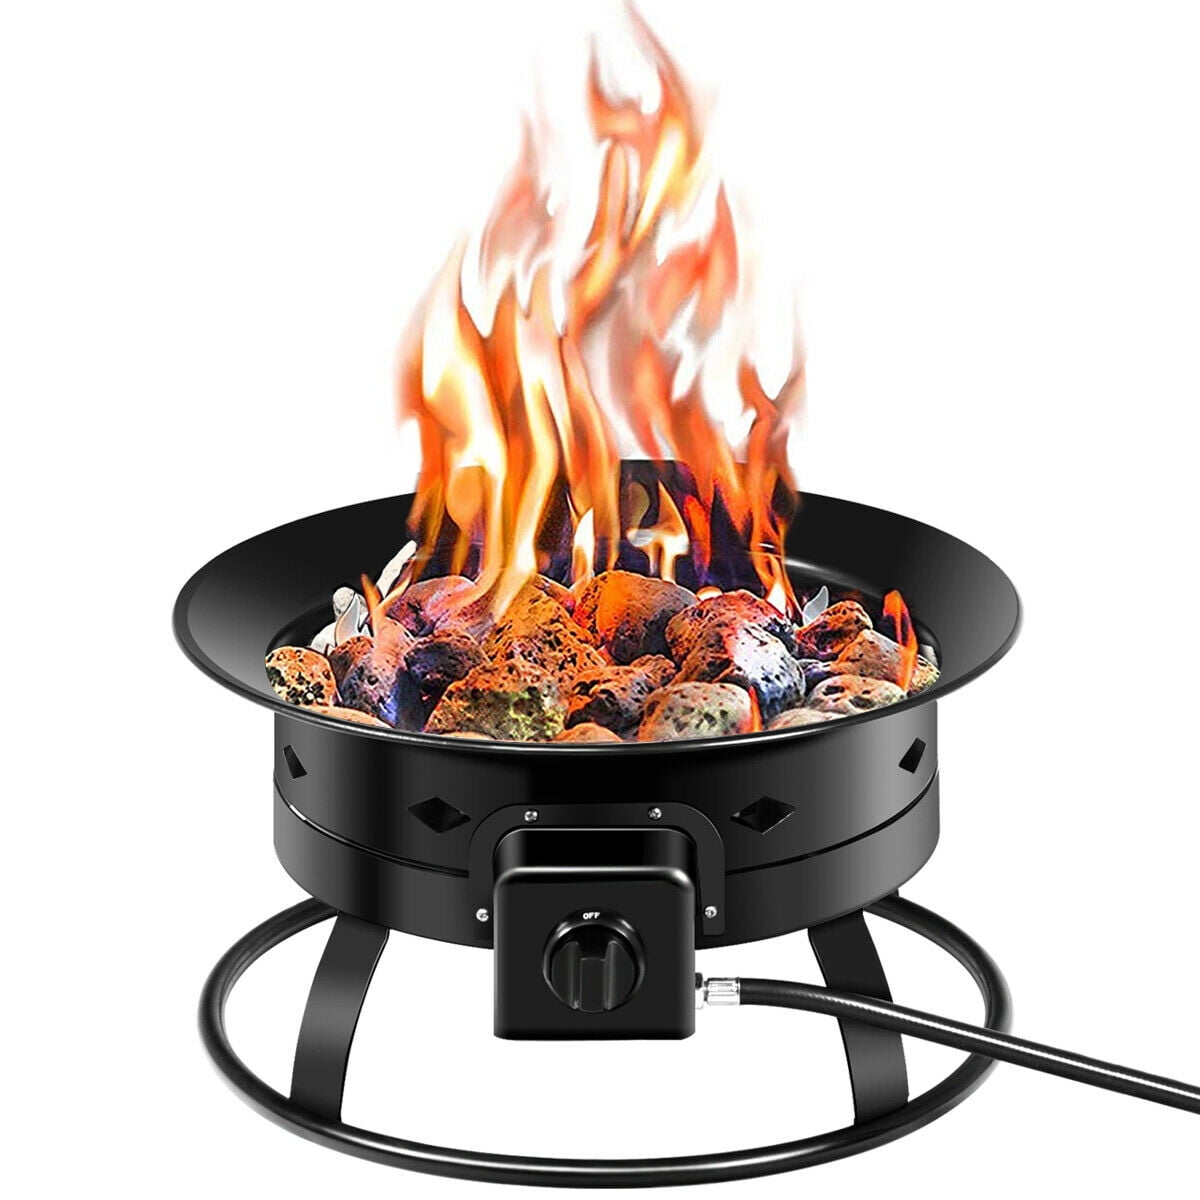 Costway Portable Fire Pit Outdoor 58, How Deep Should Lava Rock Be In Fire Pit